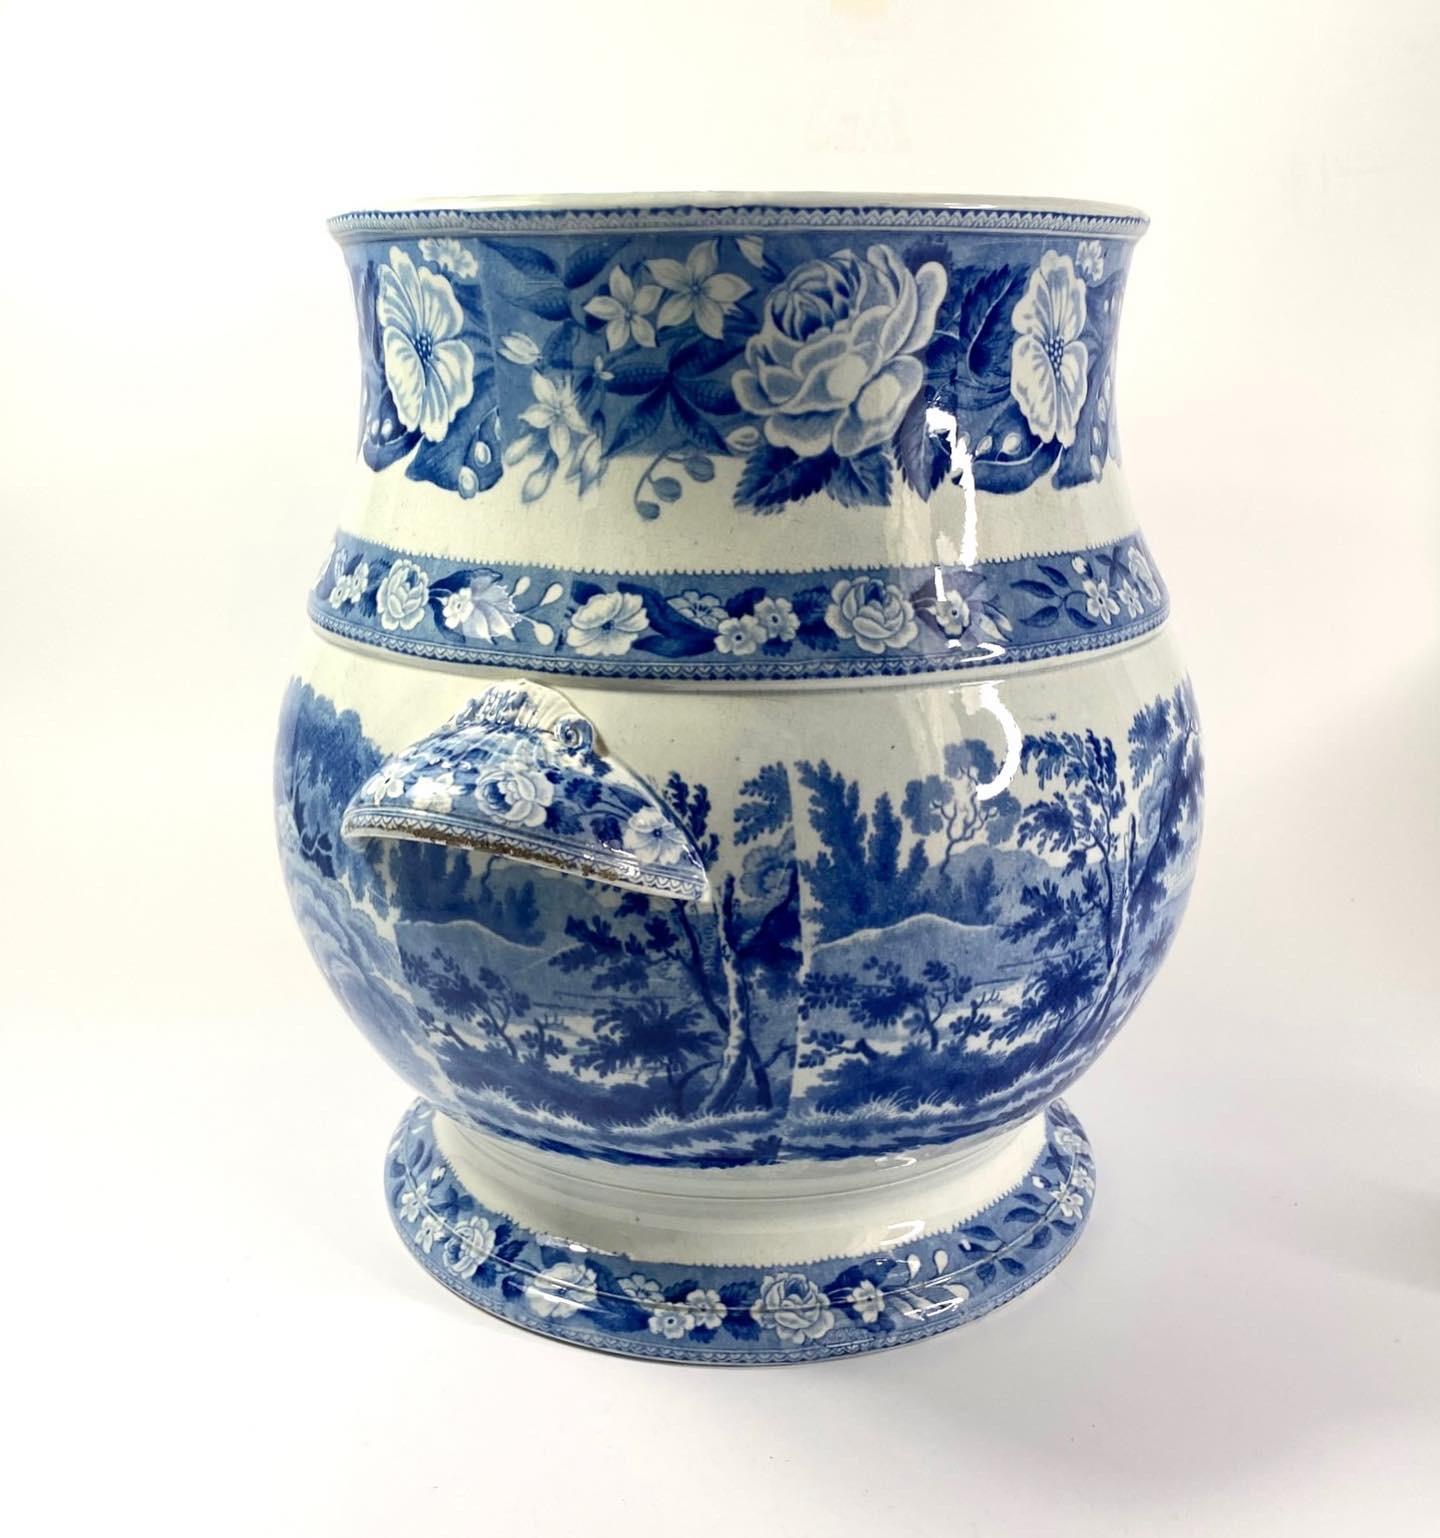 Staffordshire blue and white printed pail, c. 1830. 1